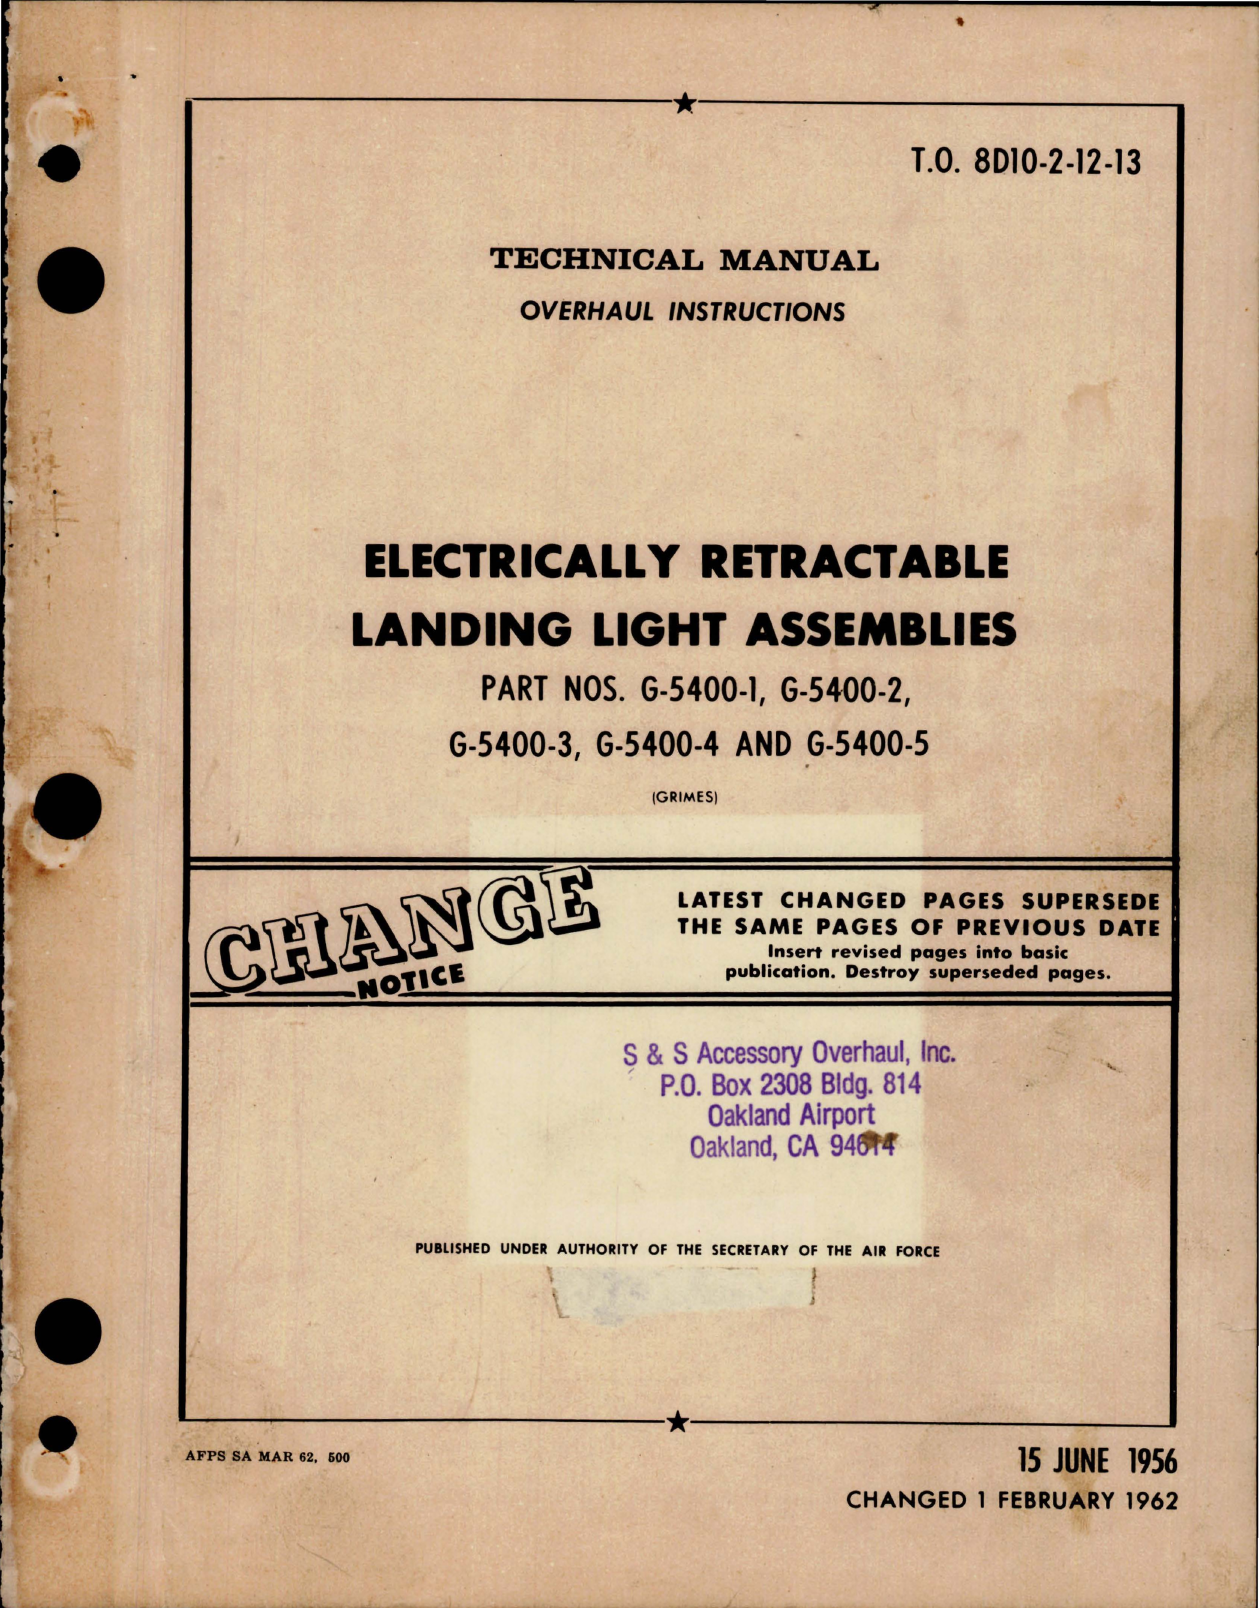 Sample page 1 from AirCorps Library document: Overhaul Instructions for Electrically Retractable Landing Light Assemblies